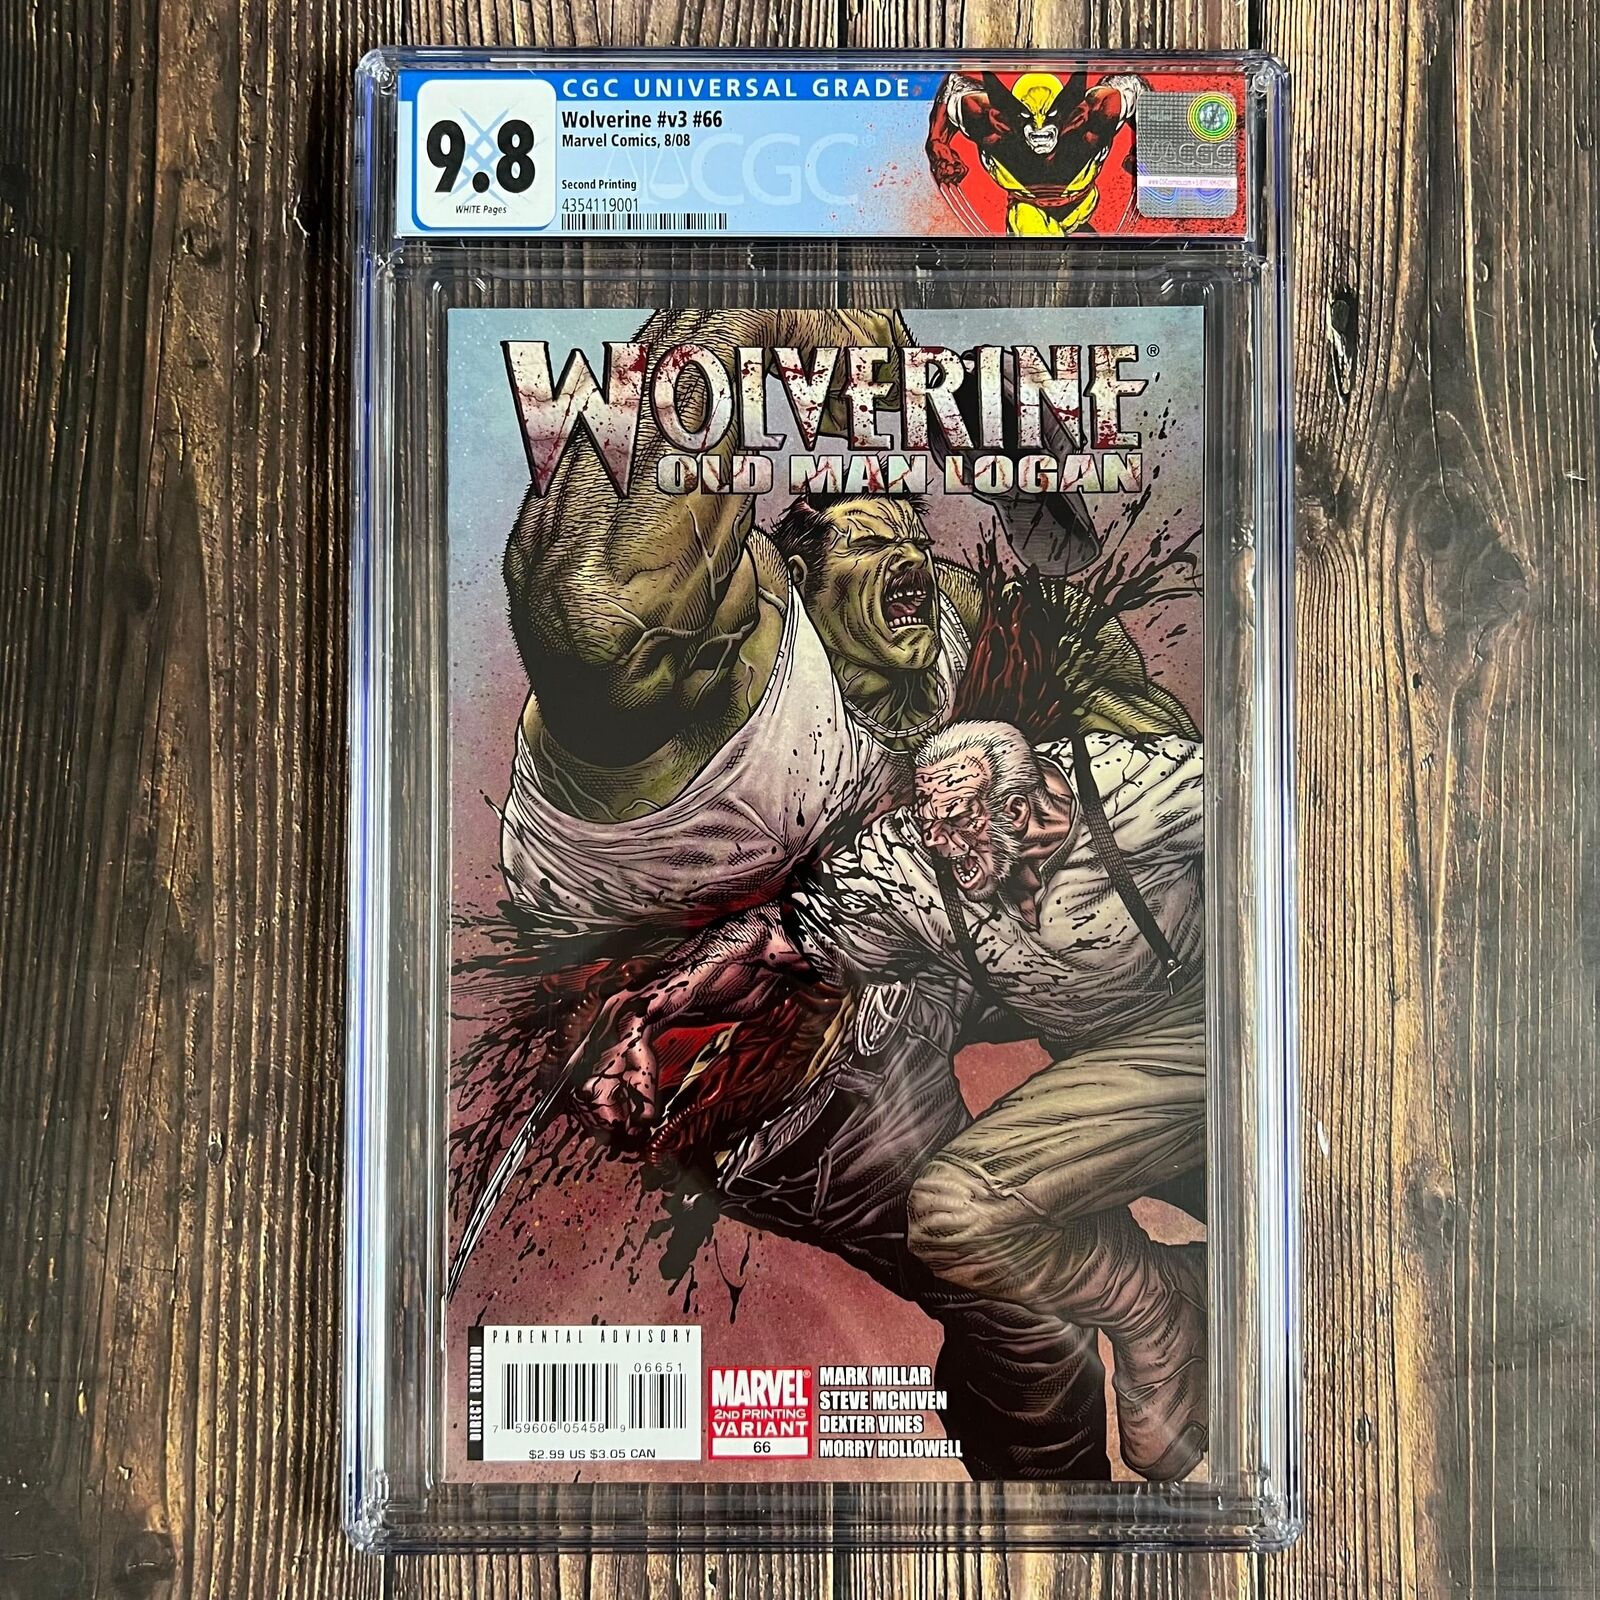 Wolverine #v3 #66 CGC 9.8 Variant second print cover art by Steve McNiven